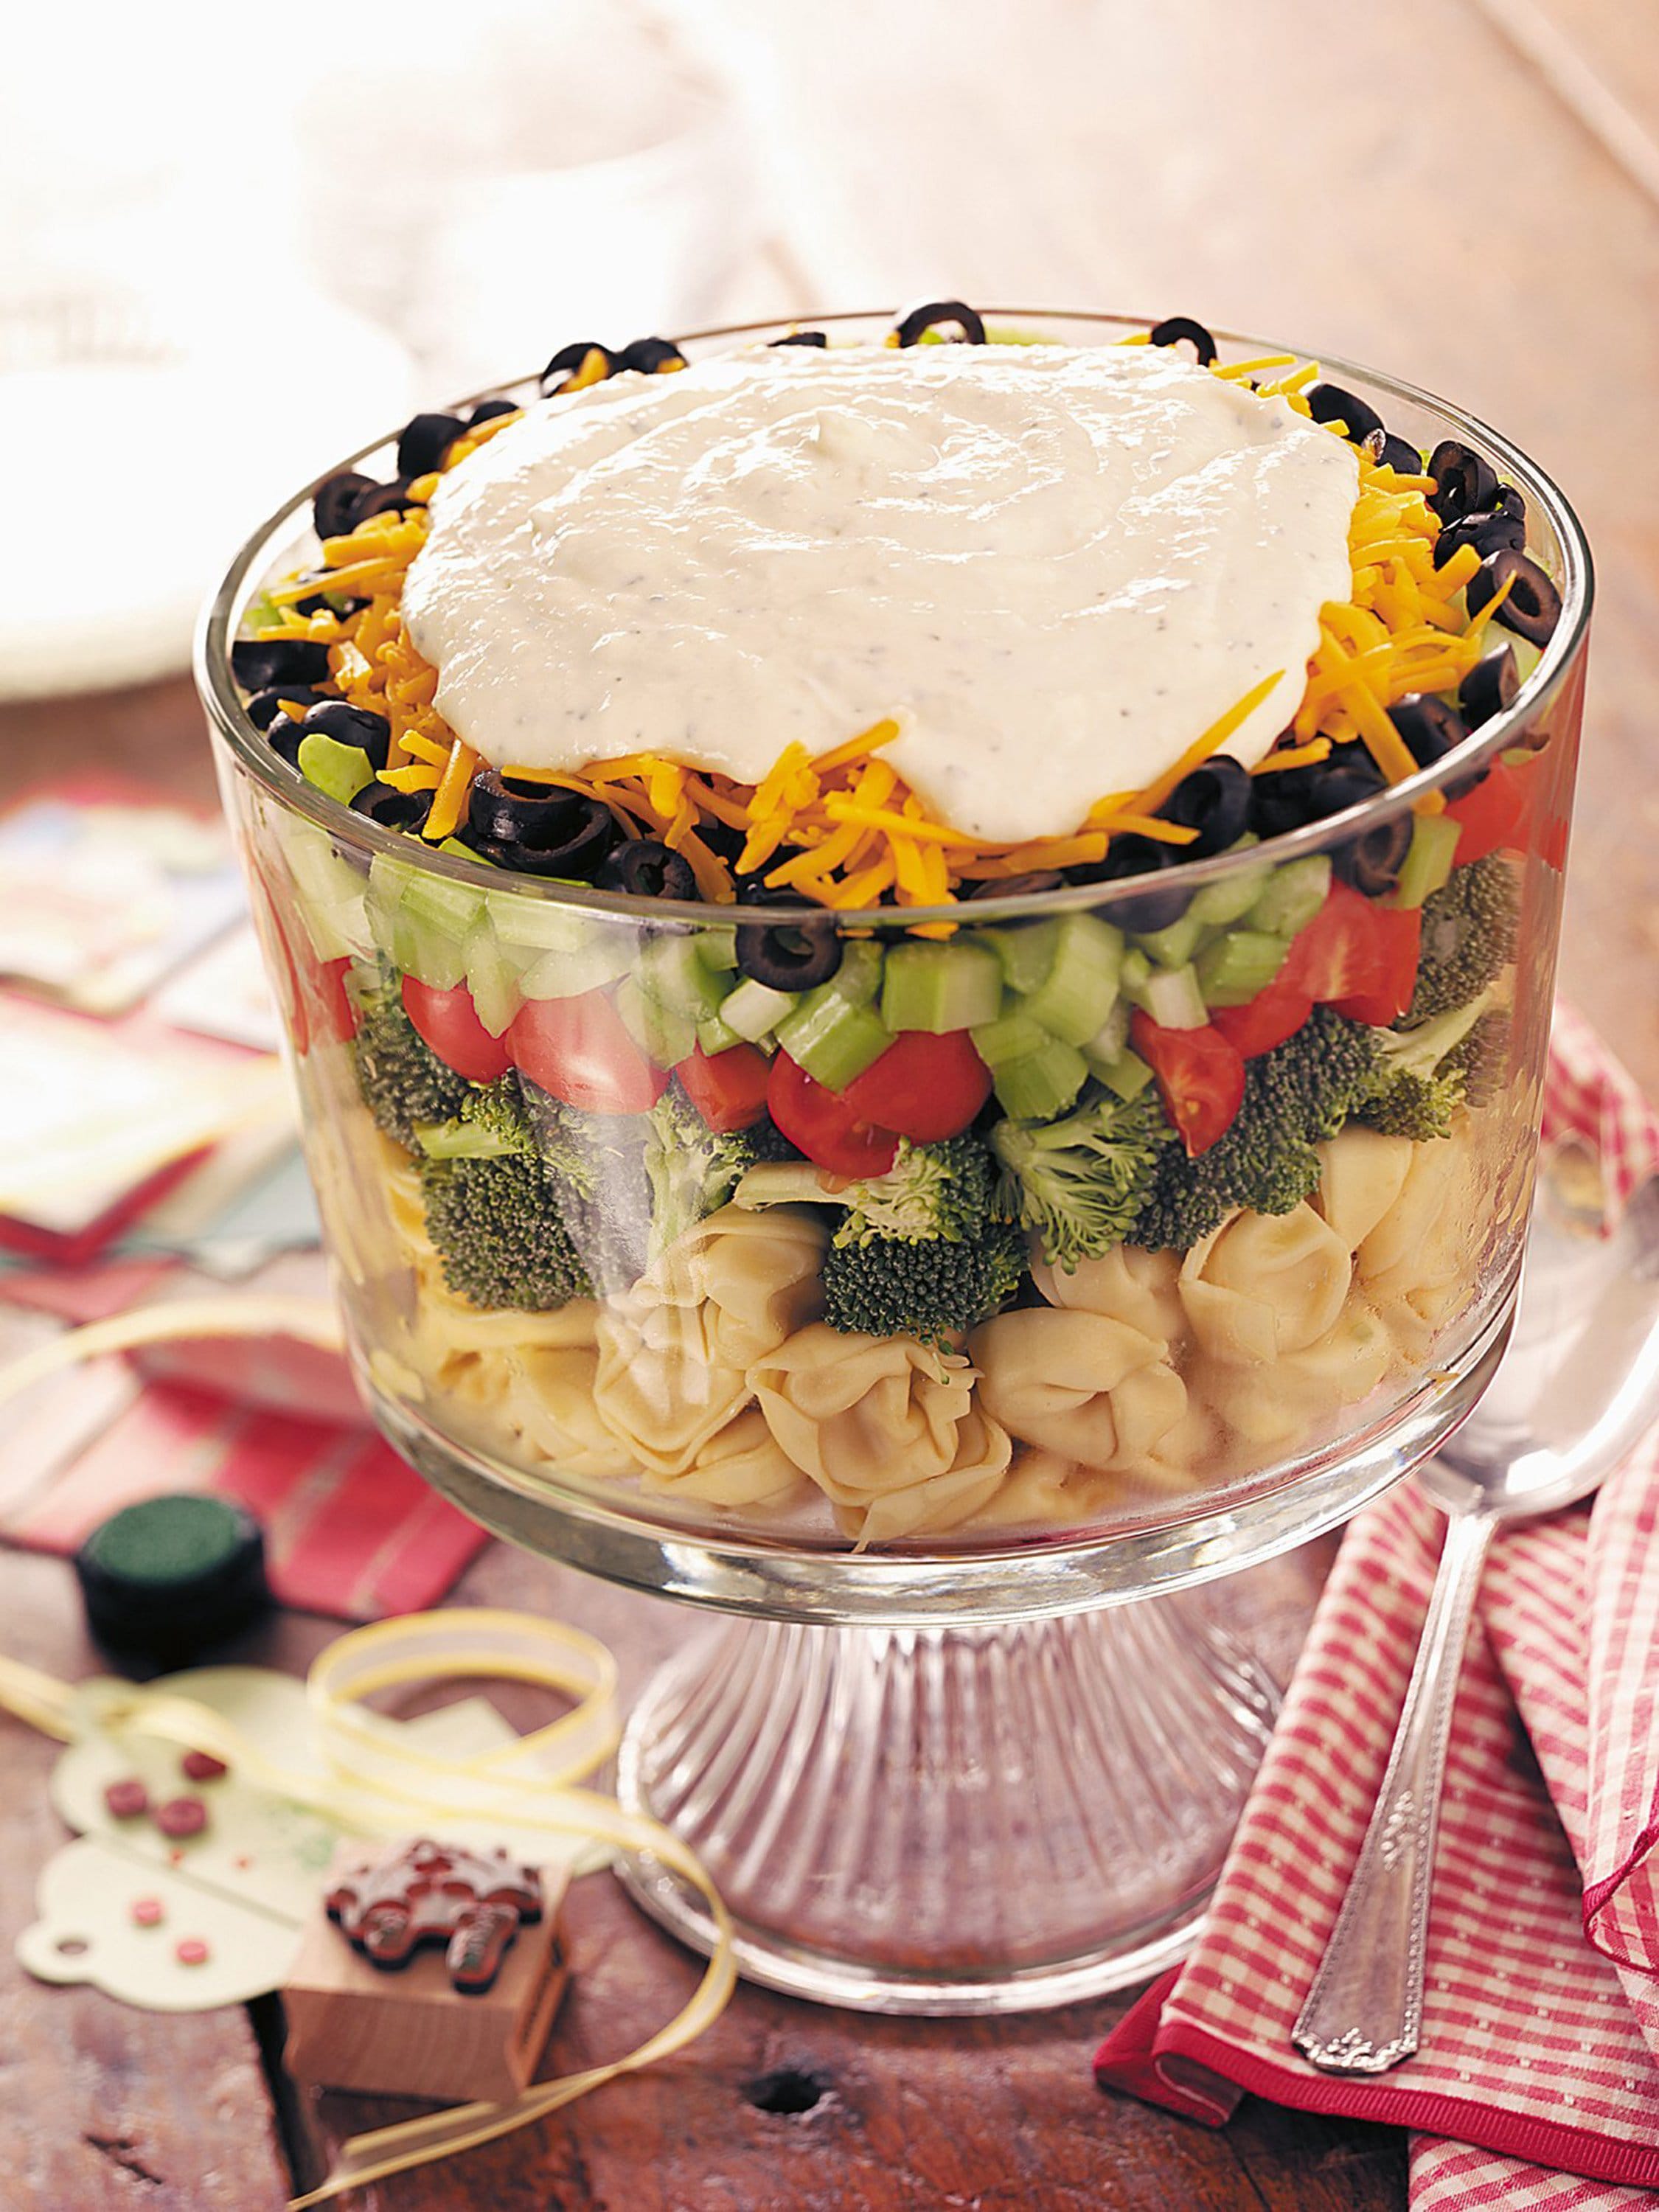 Tortellini adds another dimension to this Layered Veggie Tortellini Salad.